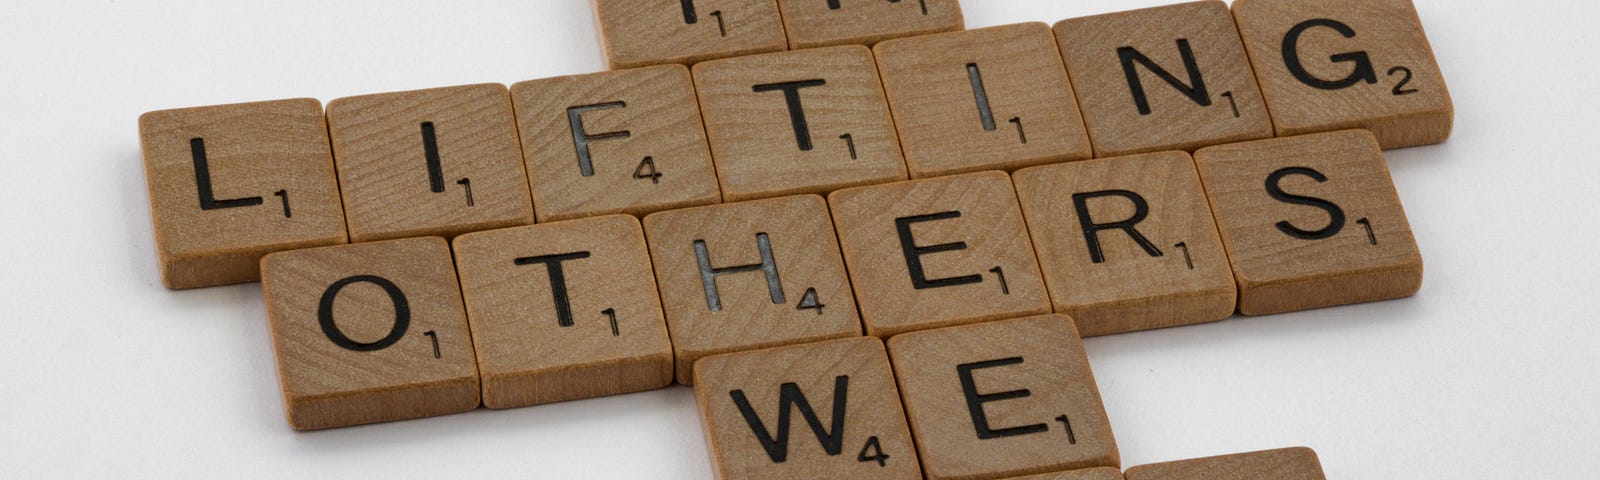 A set of wooden scrabble pieces arranged to read the sentence, “In Lifting Others We Rise”